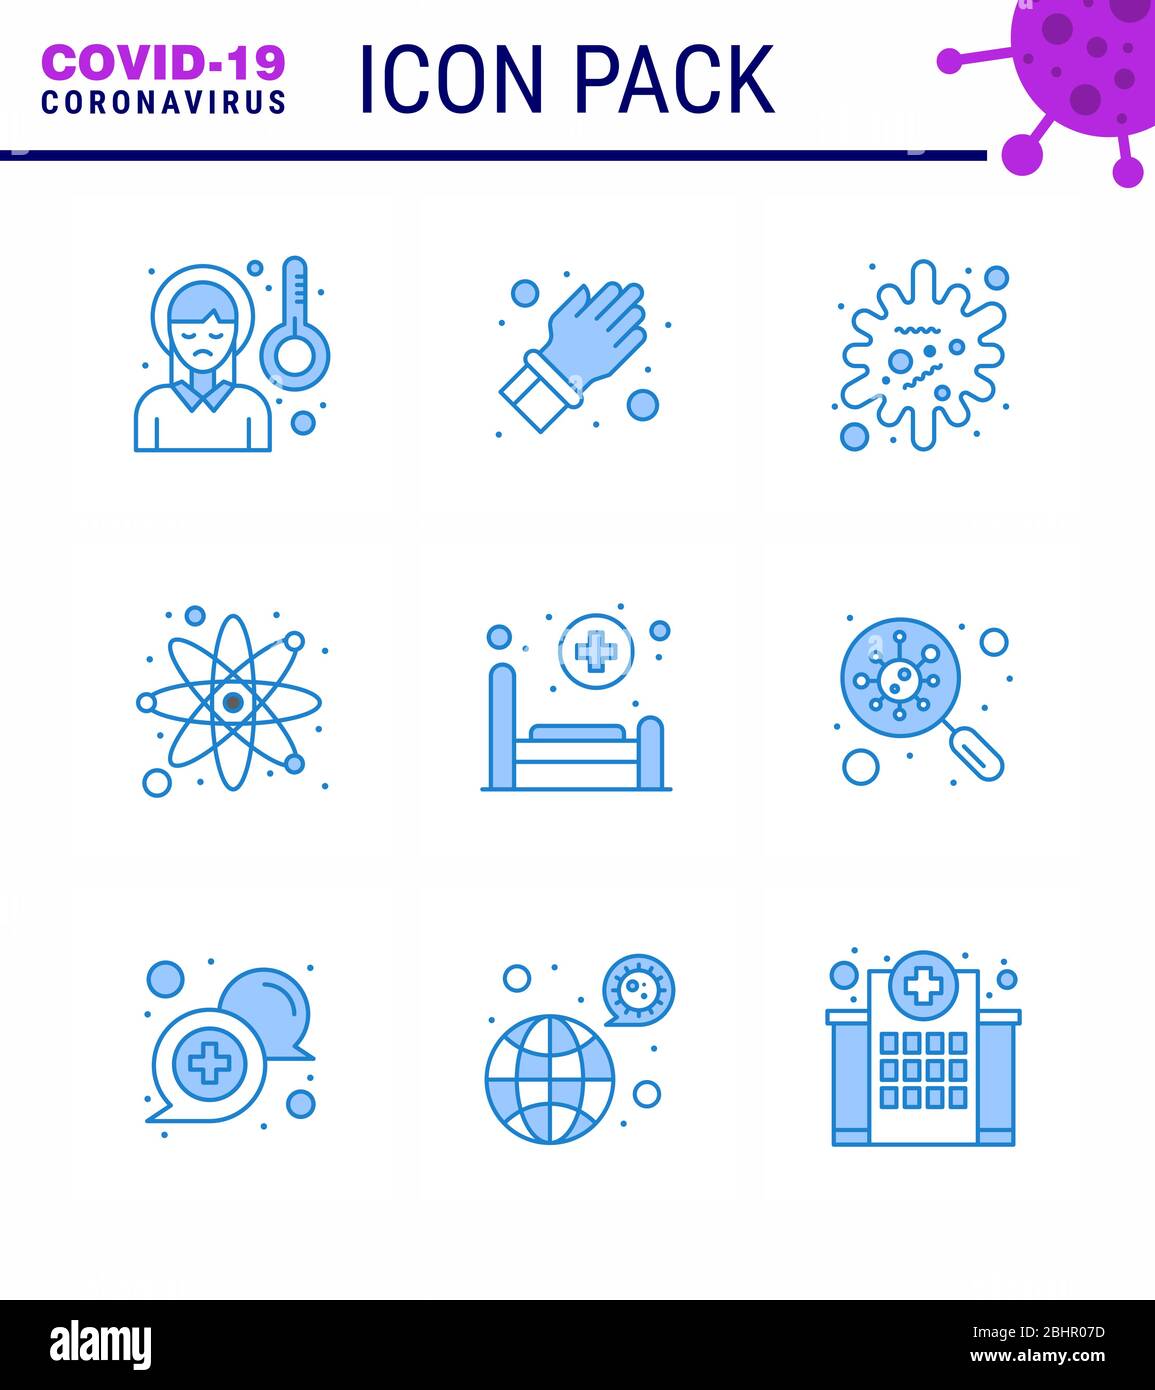 9 Blue Coronavirus Covid19 Icon pack such as bed, science, care, laboratory, infection viral coronavirus 2019-nov disease Vector Design Elements Stock Vector